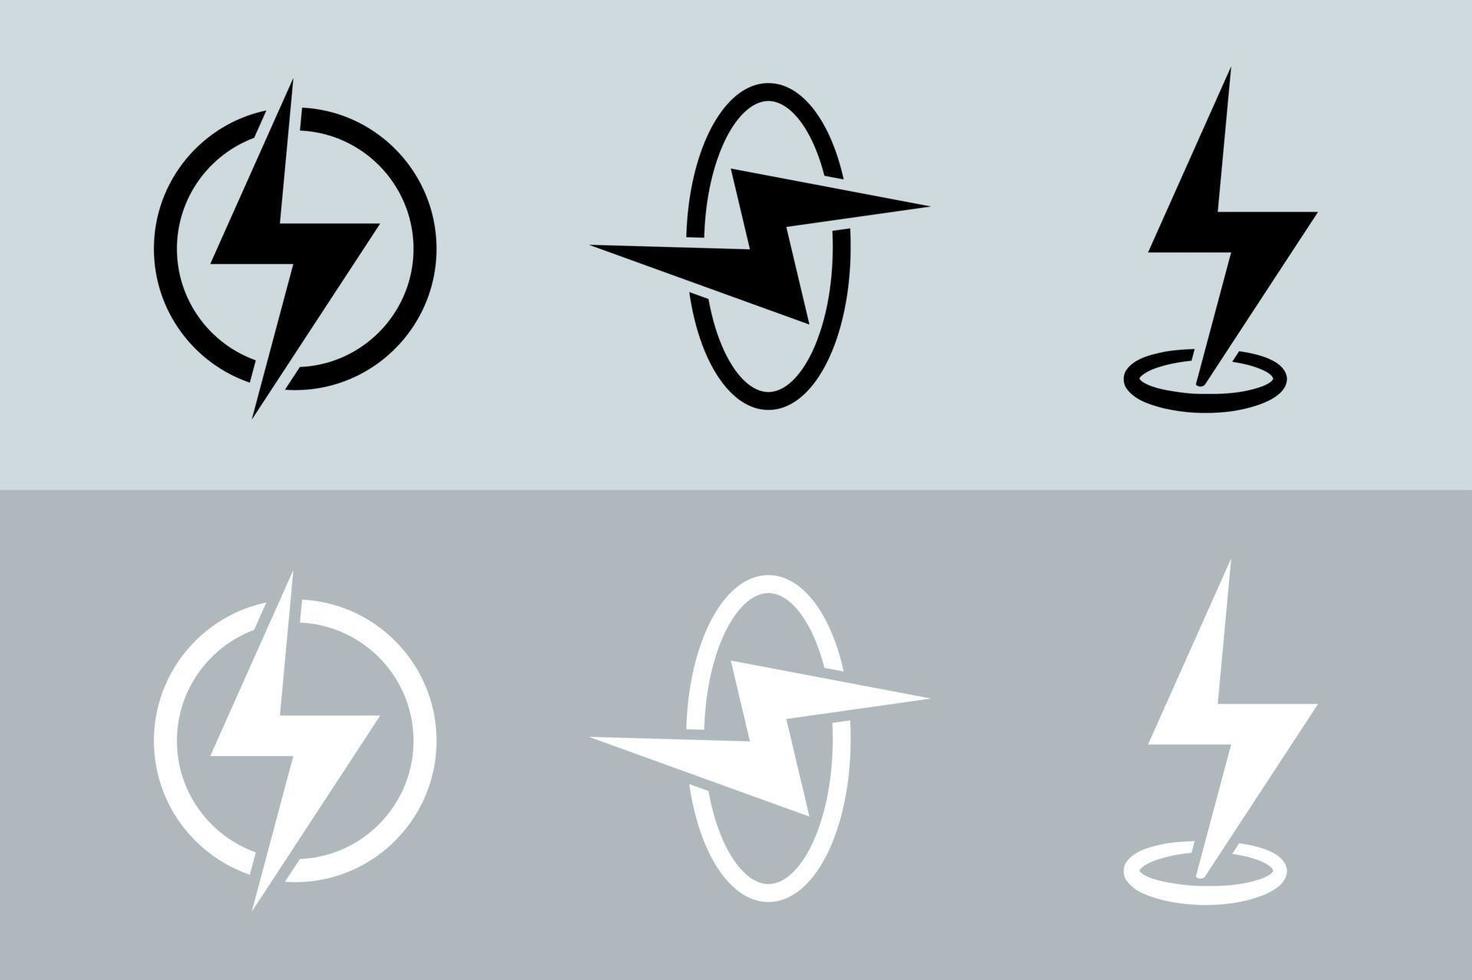 Flash thunder power icon set in black and white. Lightning bolt vector icon.